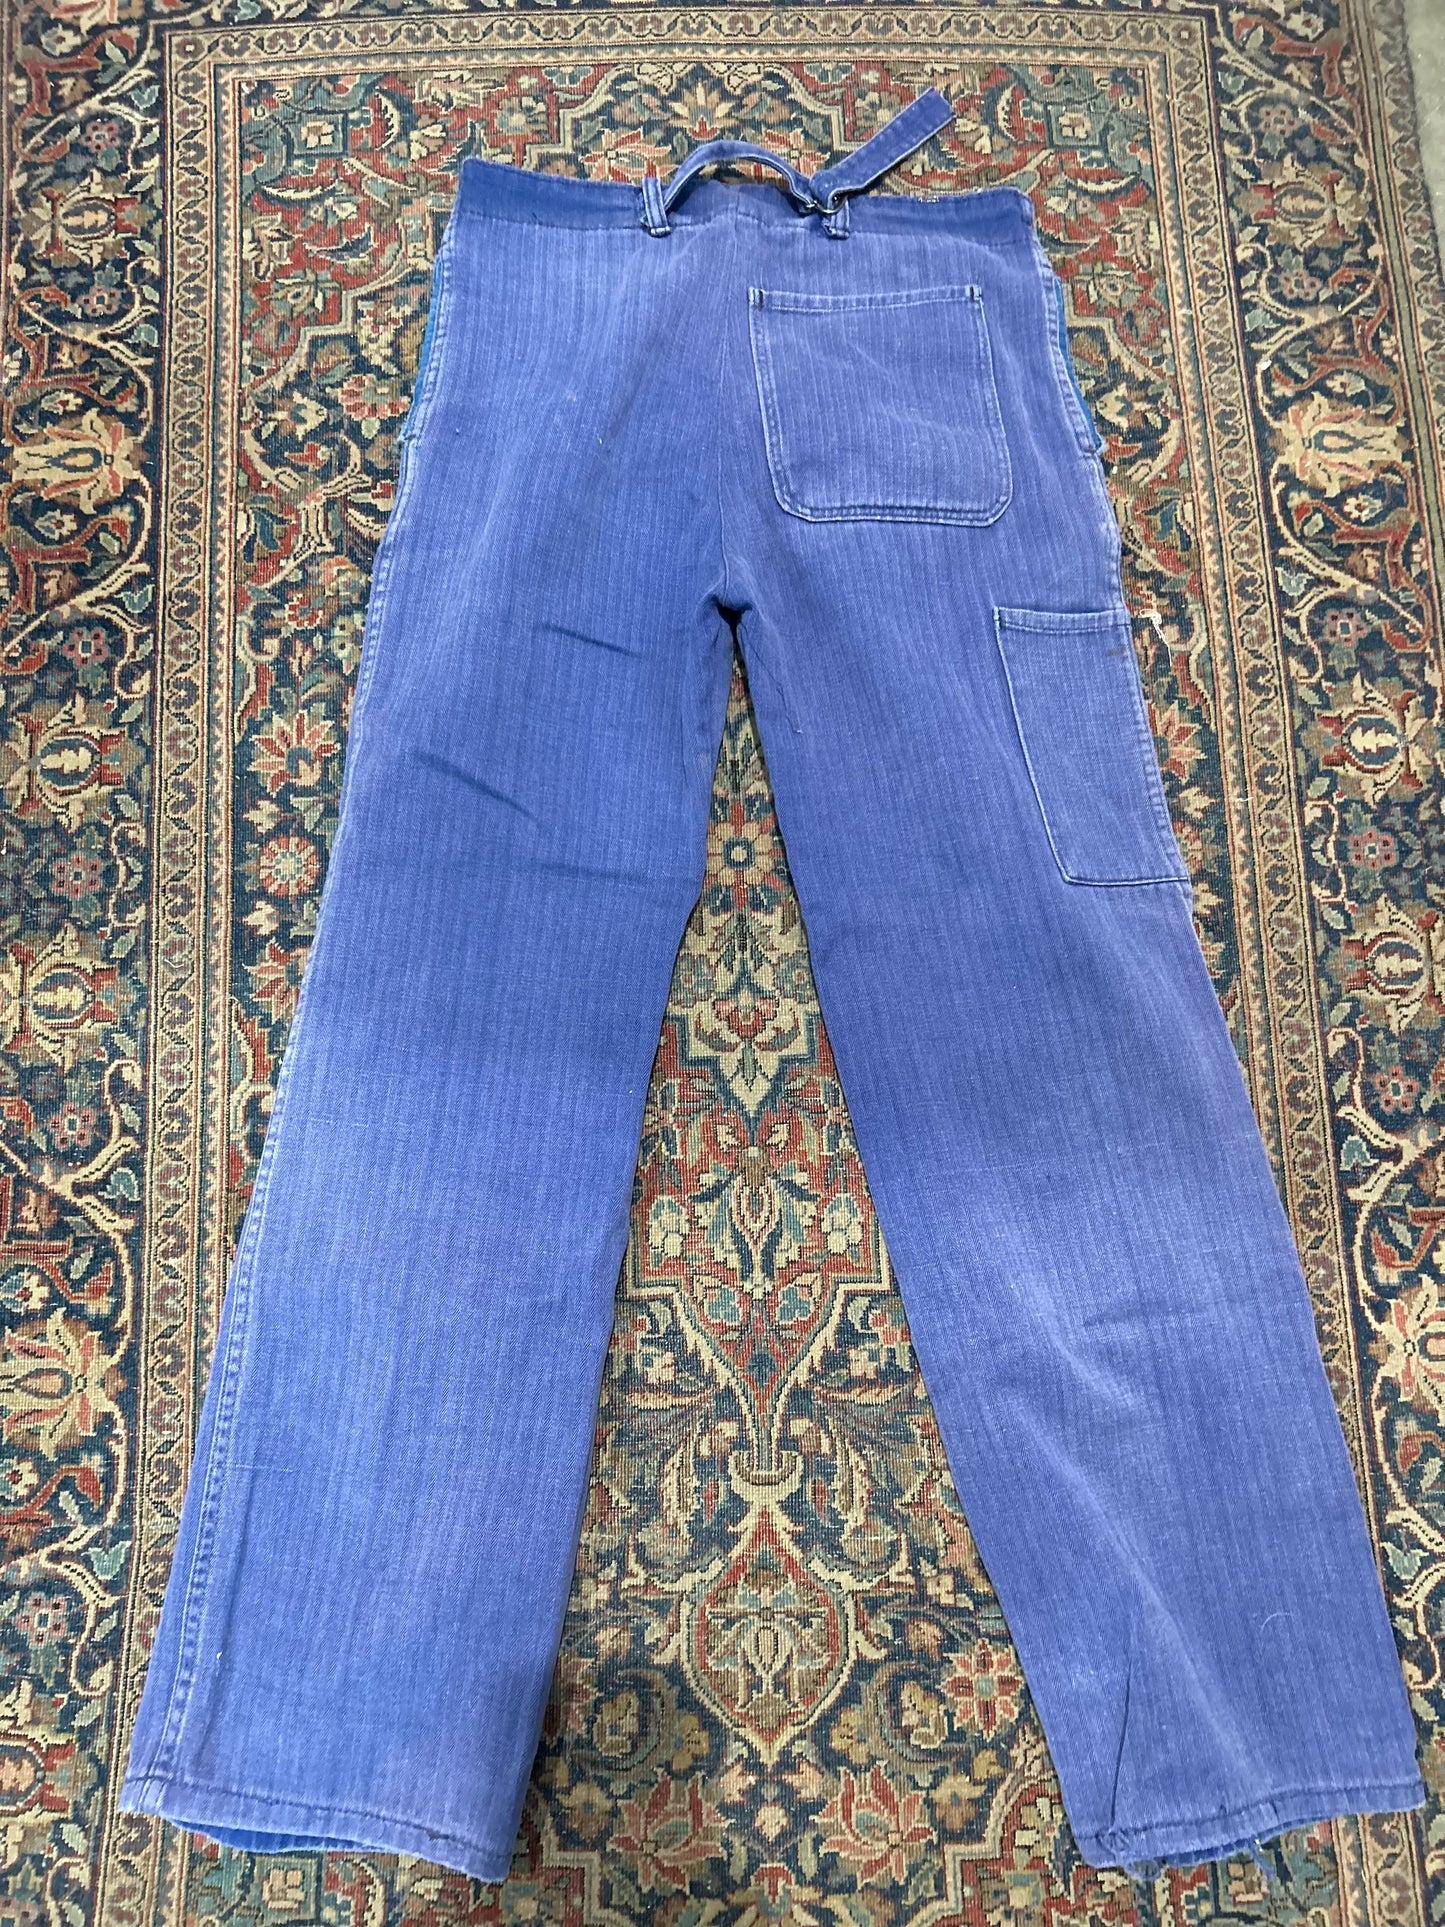 Vintage French Work Wear Pants